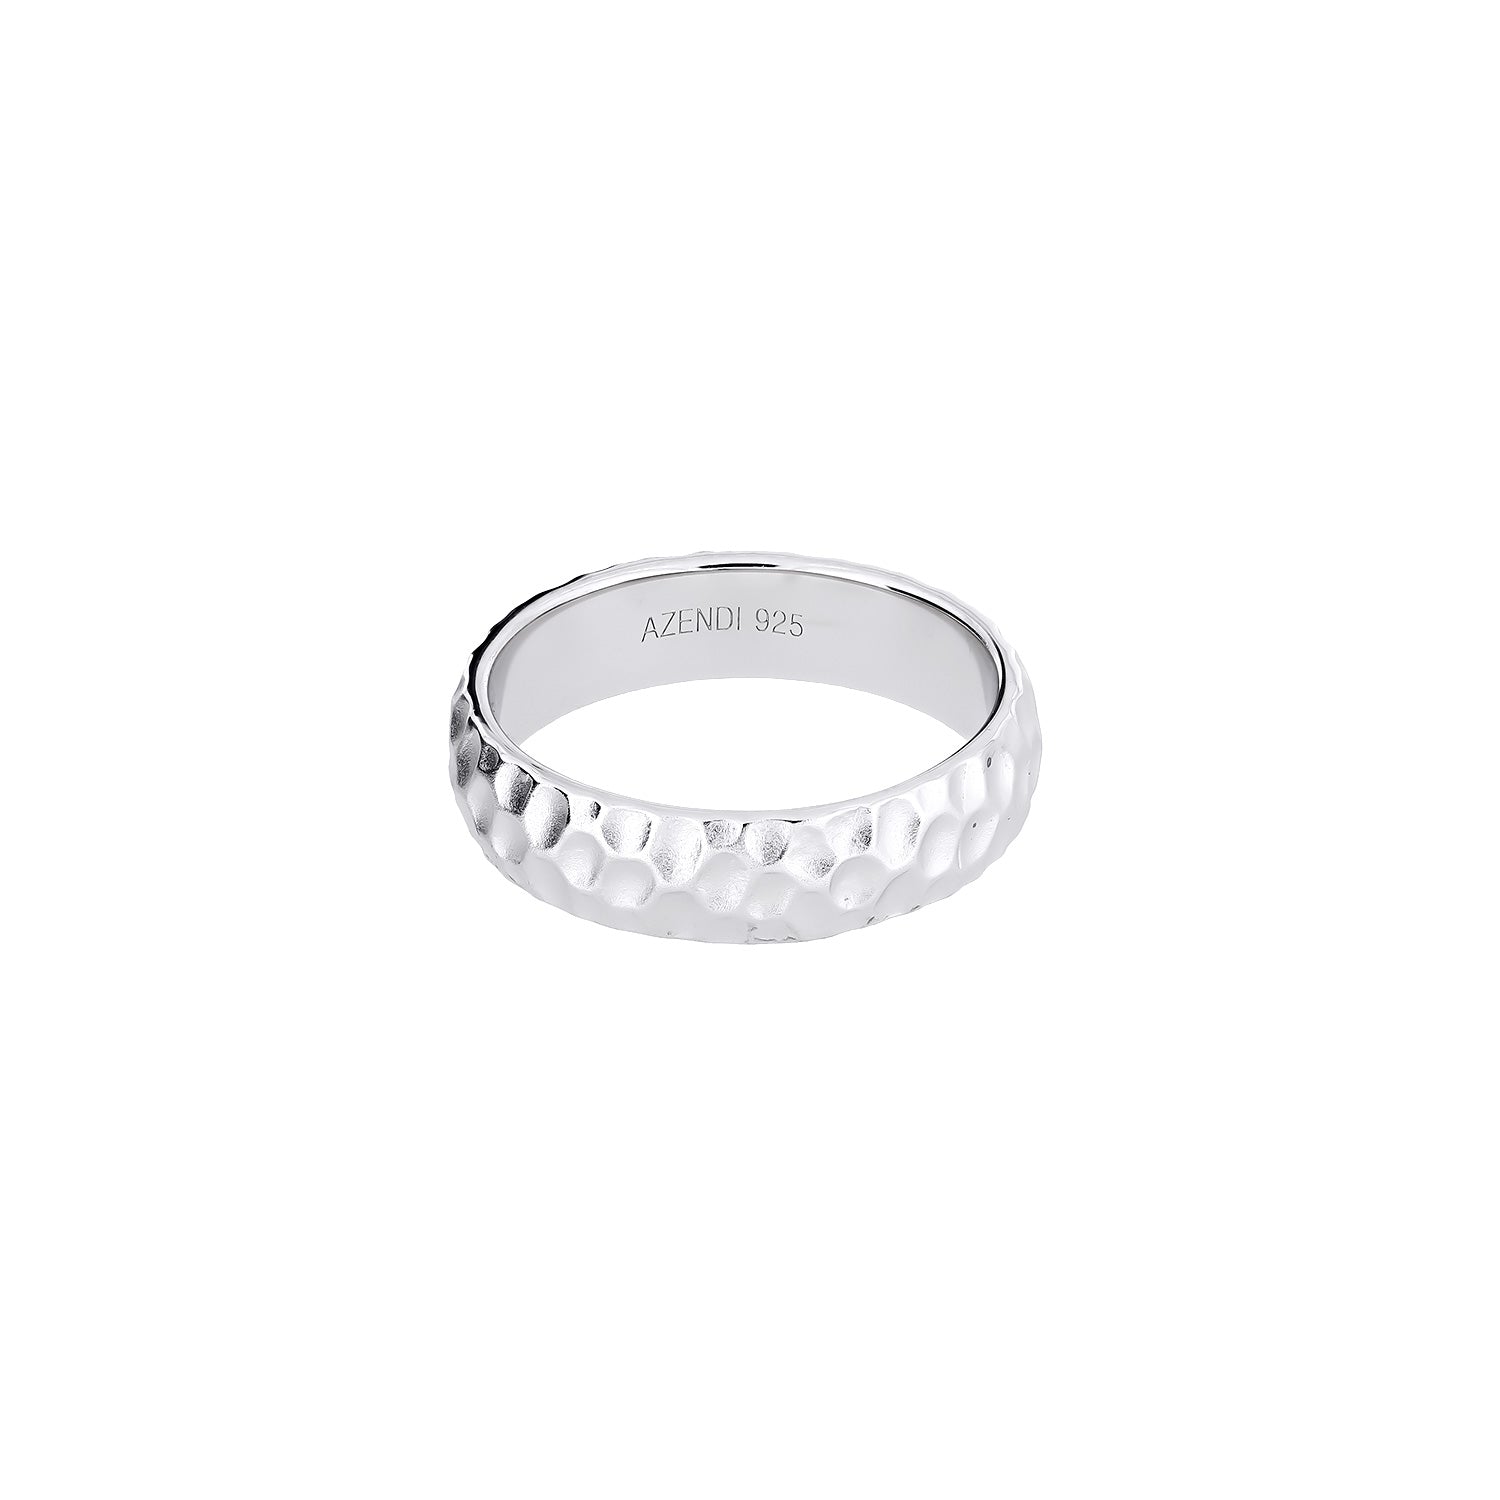 Sterling Silver Satin Hammered Elements Ring